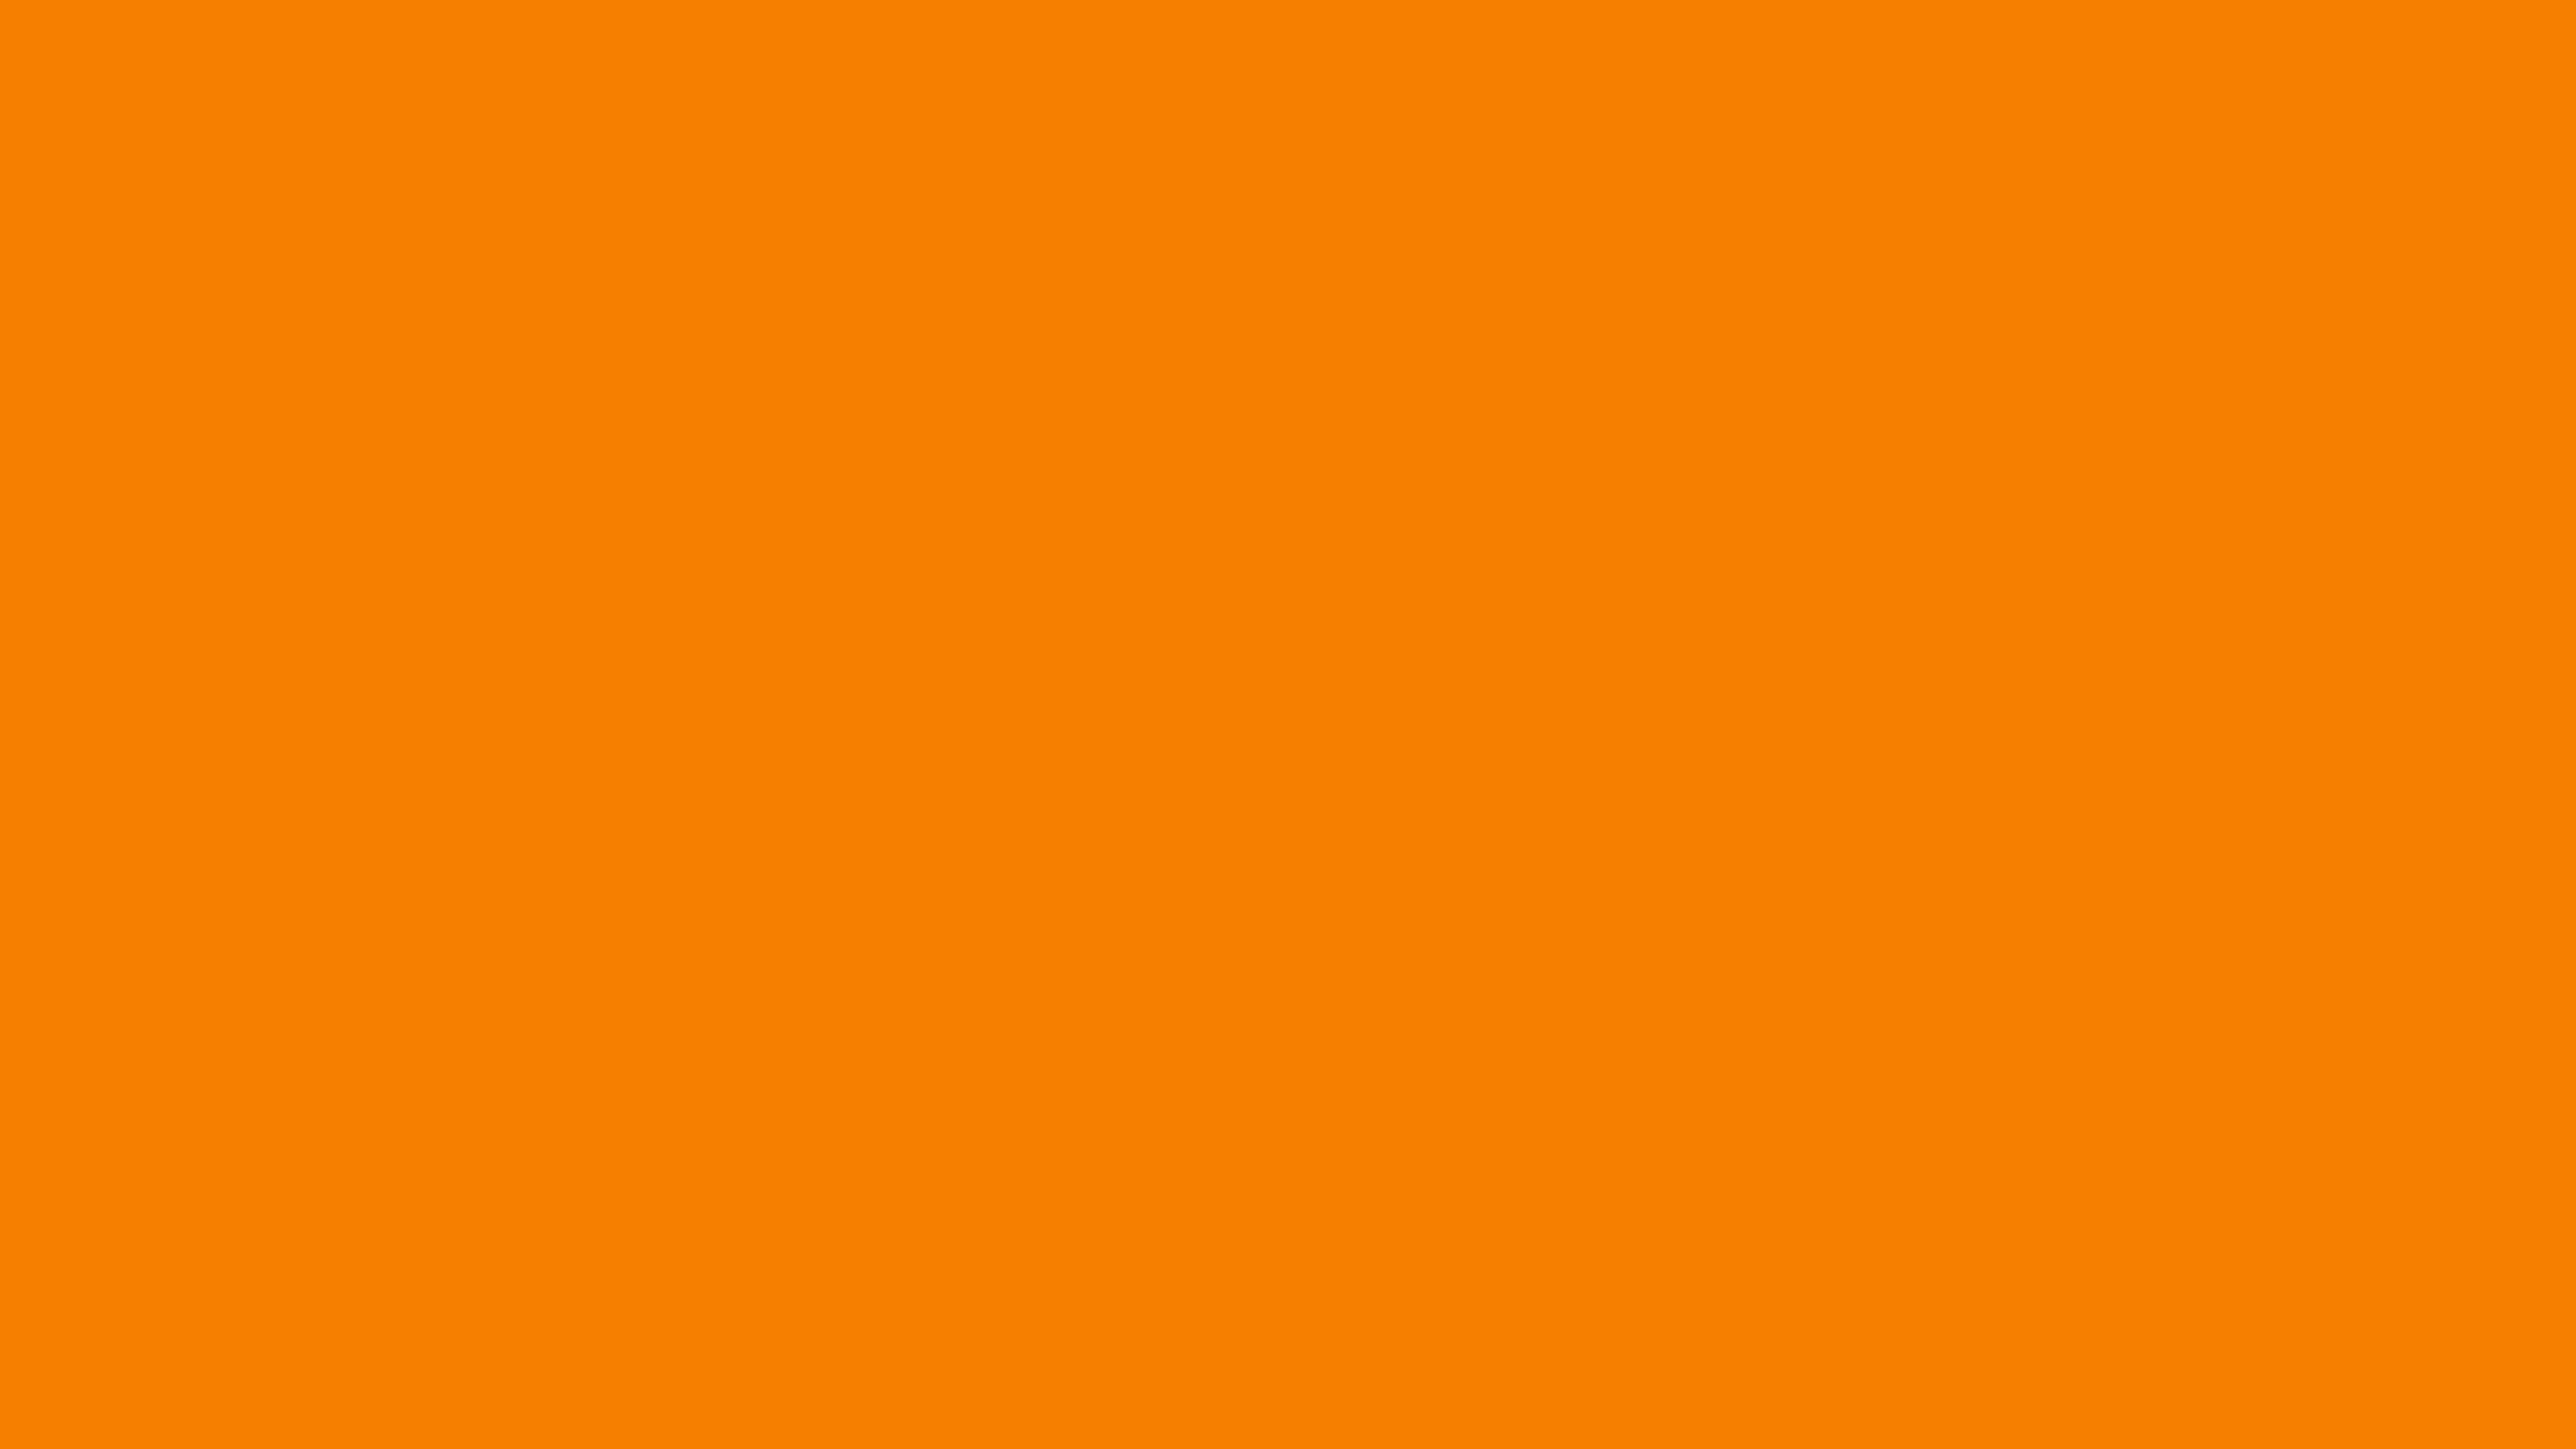 5120x2880 University Of Tennessee Orange Solid Color Background